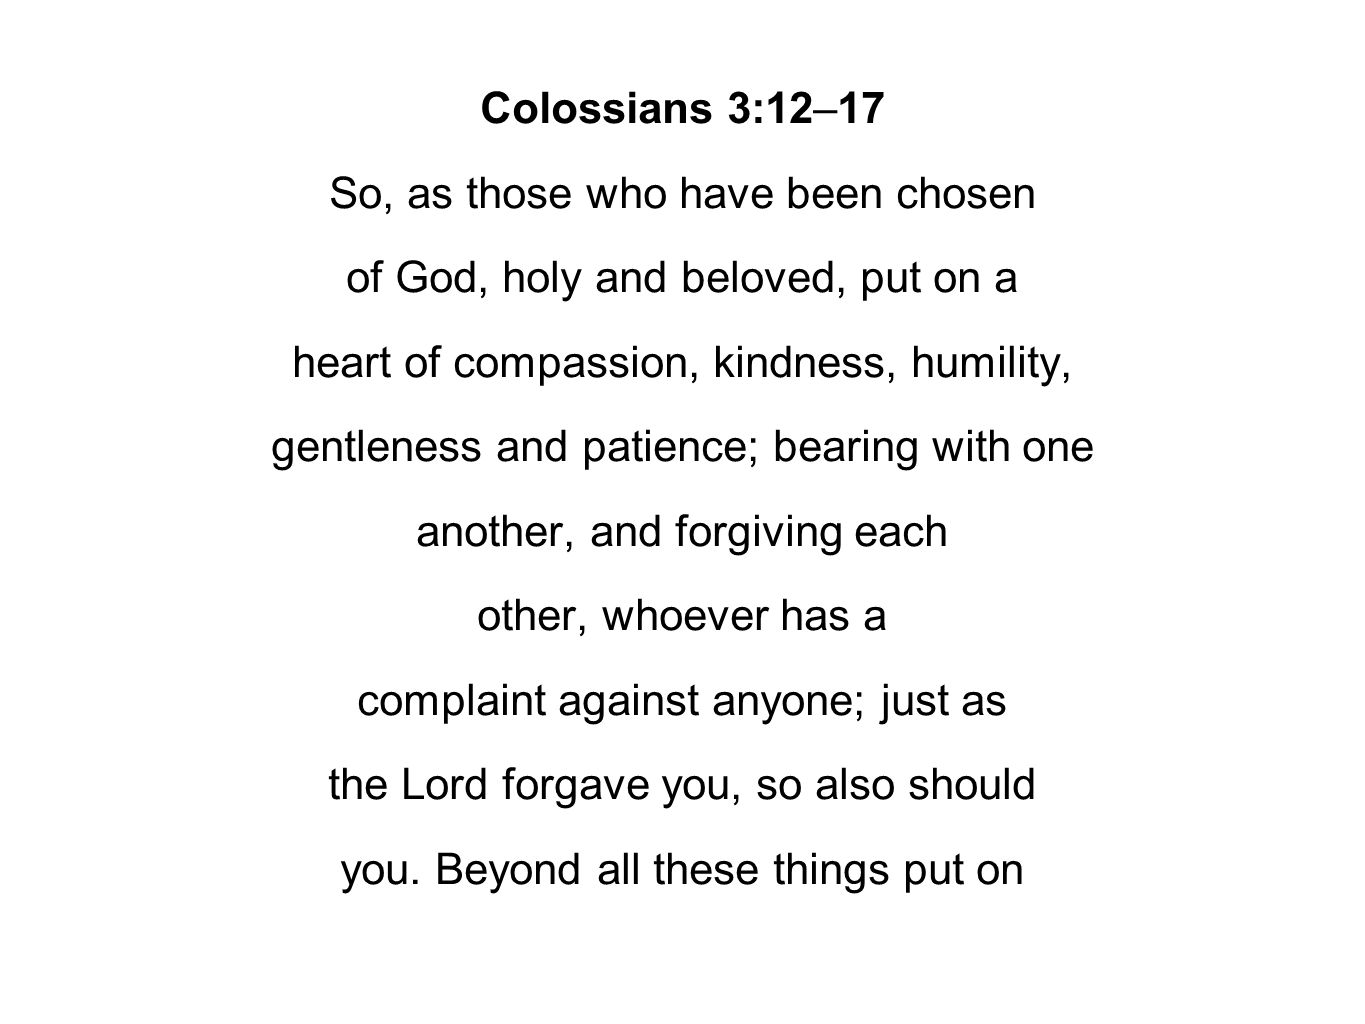 Colossians 3:12–17 So, as those who have been chosen of God, holy and beloved, put on a heart of compassion, kindness, humility, gentleness and patience; bearing with one another, and forgiving each other, whoever has a complaint against anyone; just as the Lord forgave you, so also should you.